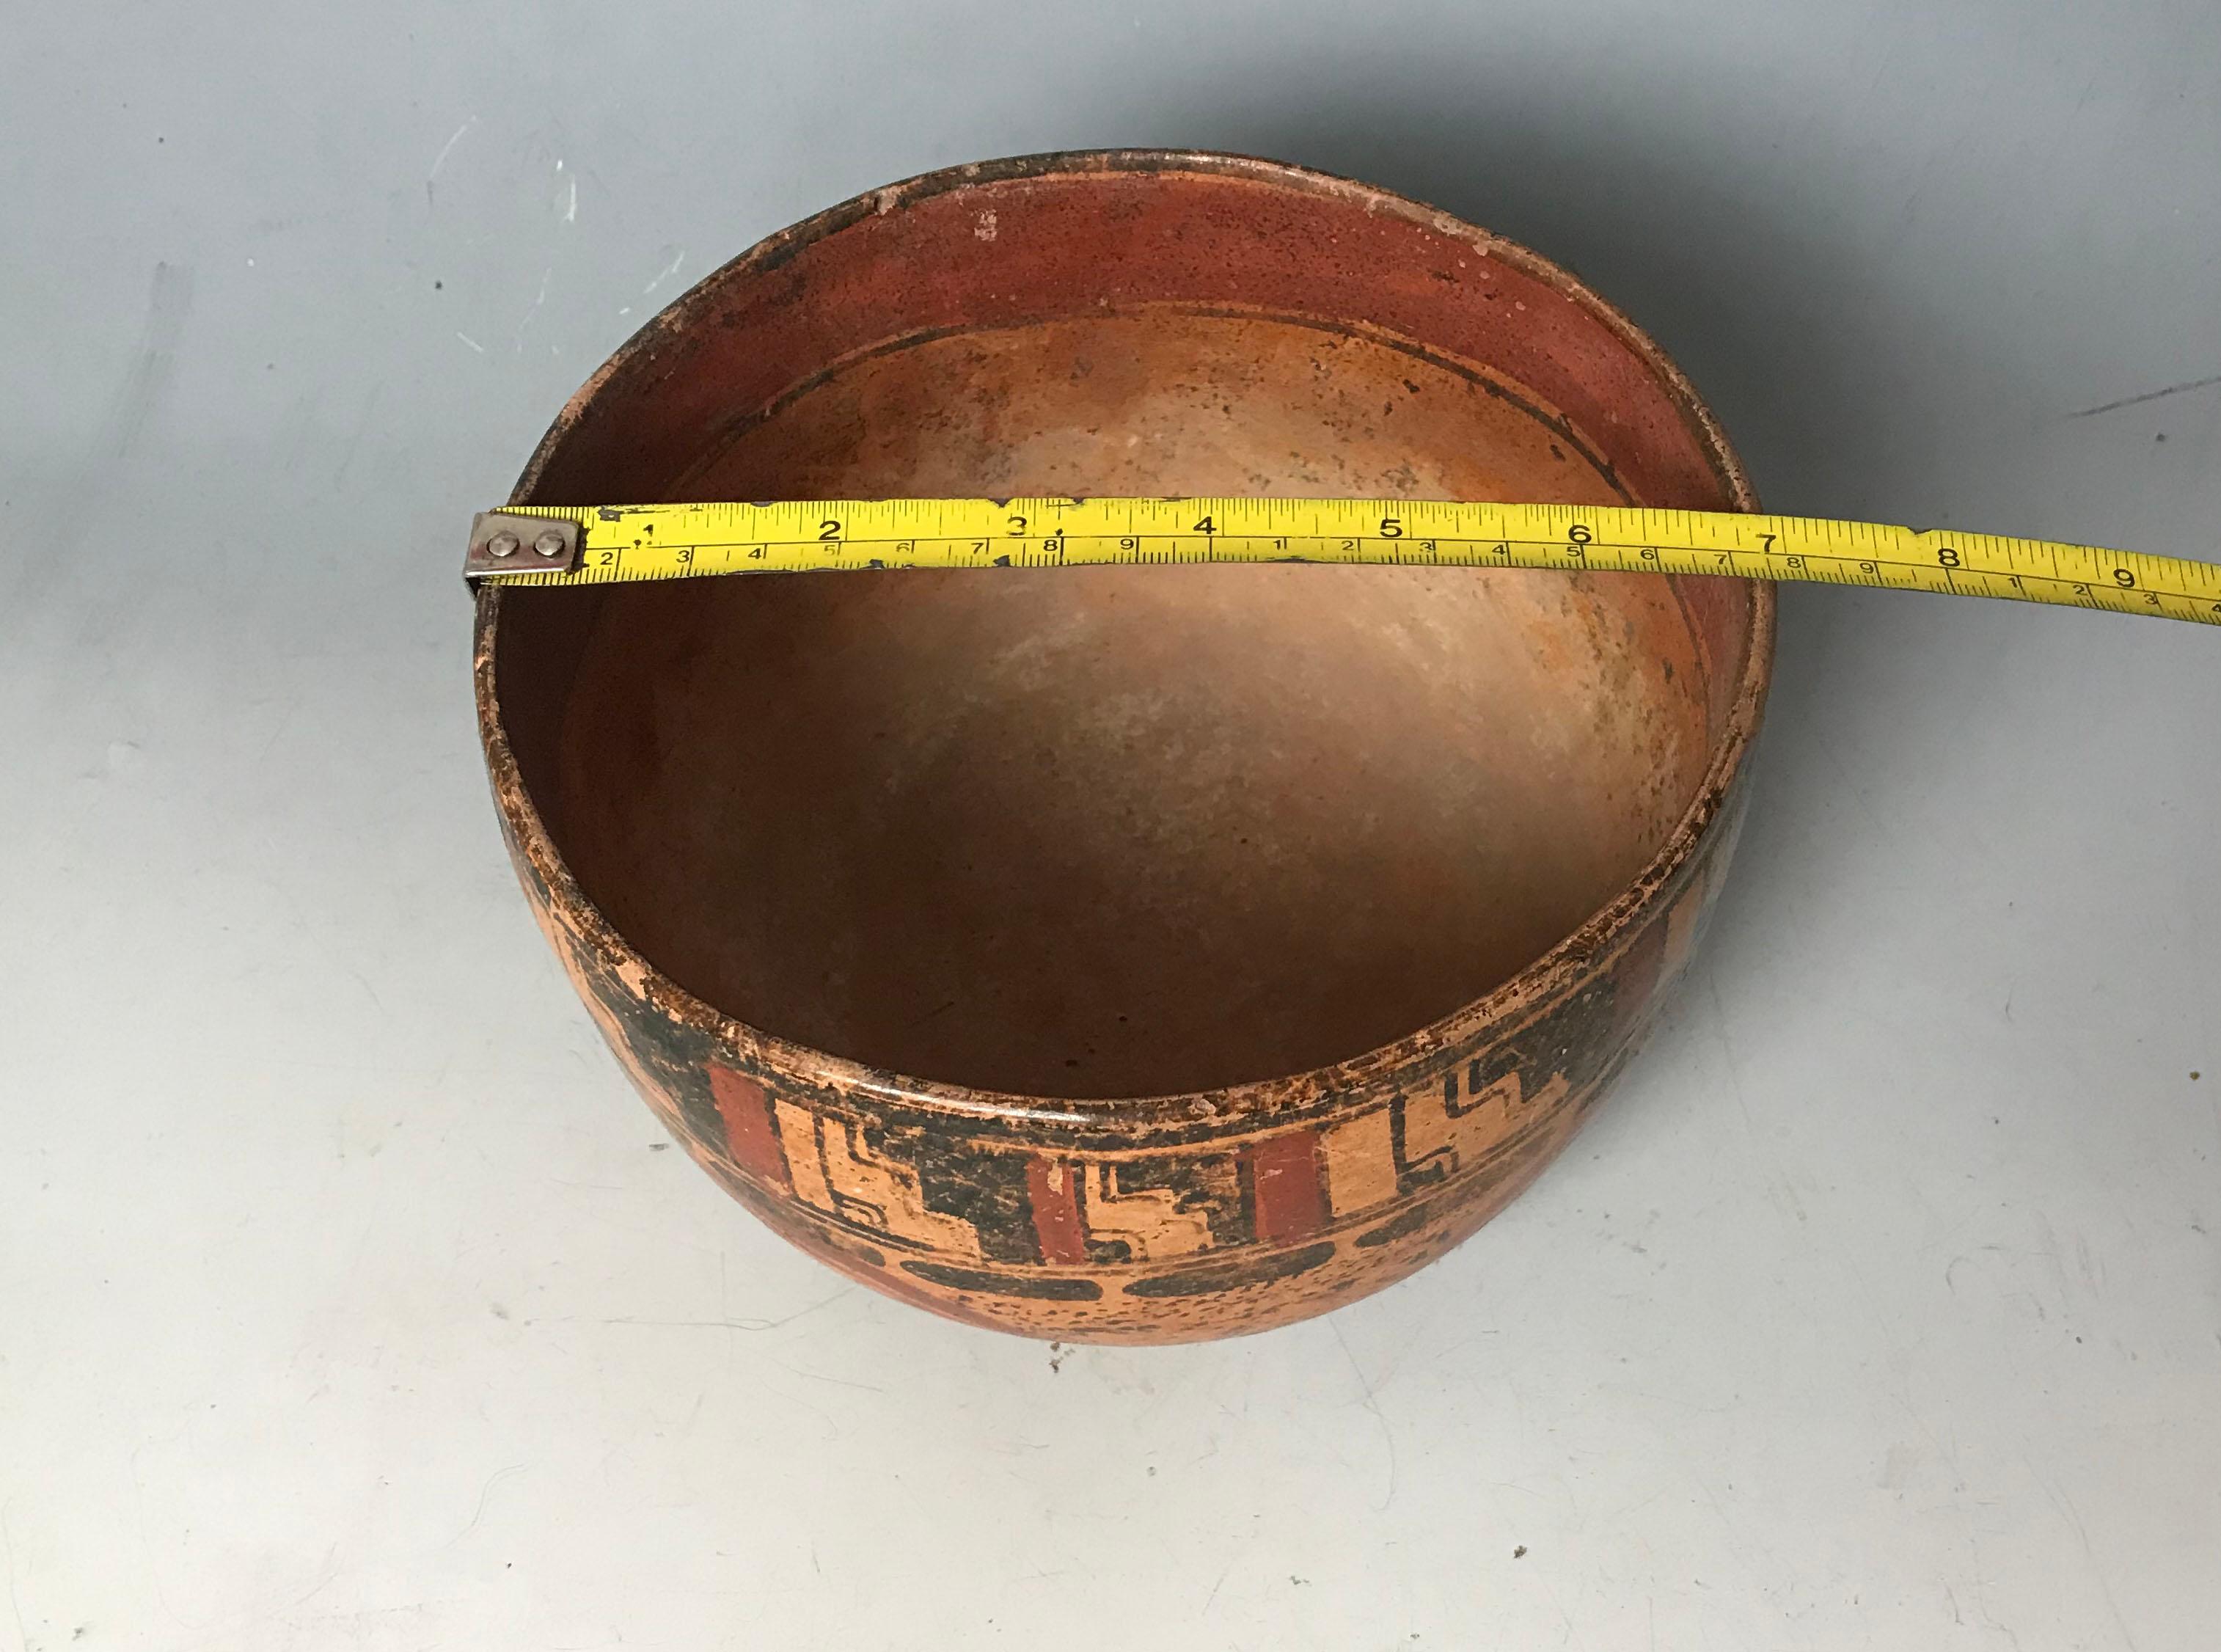 Hand-Crafted Pre Columbian Maya Polychrome Pottery Bowl circa A.D. 550-950